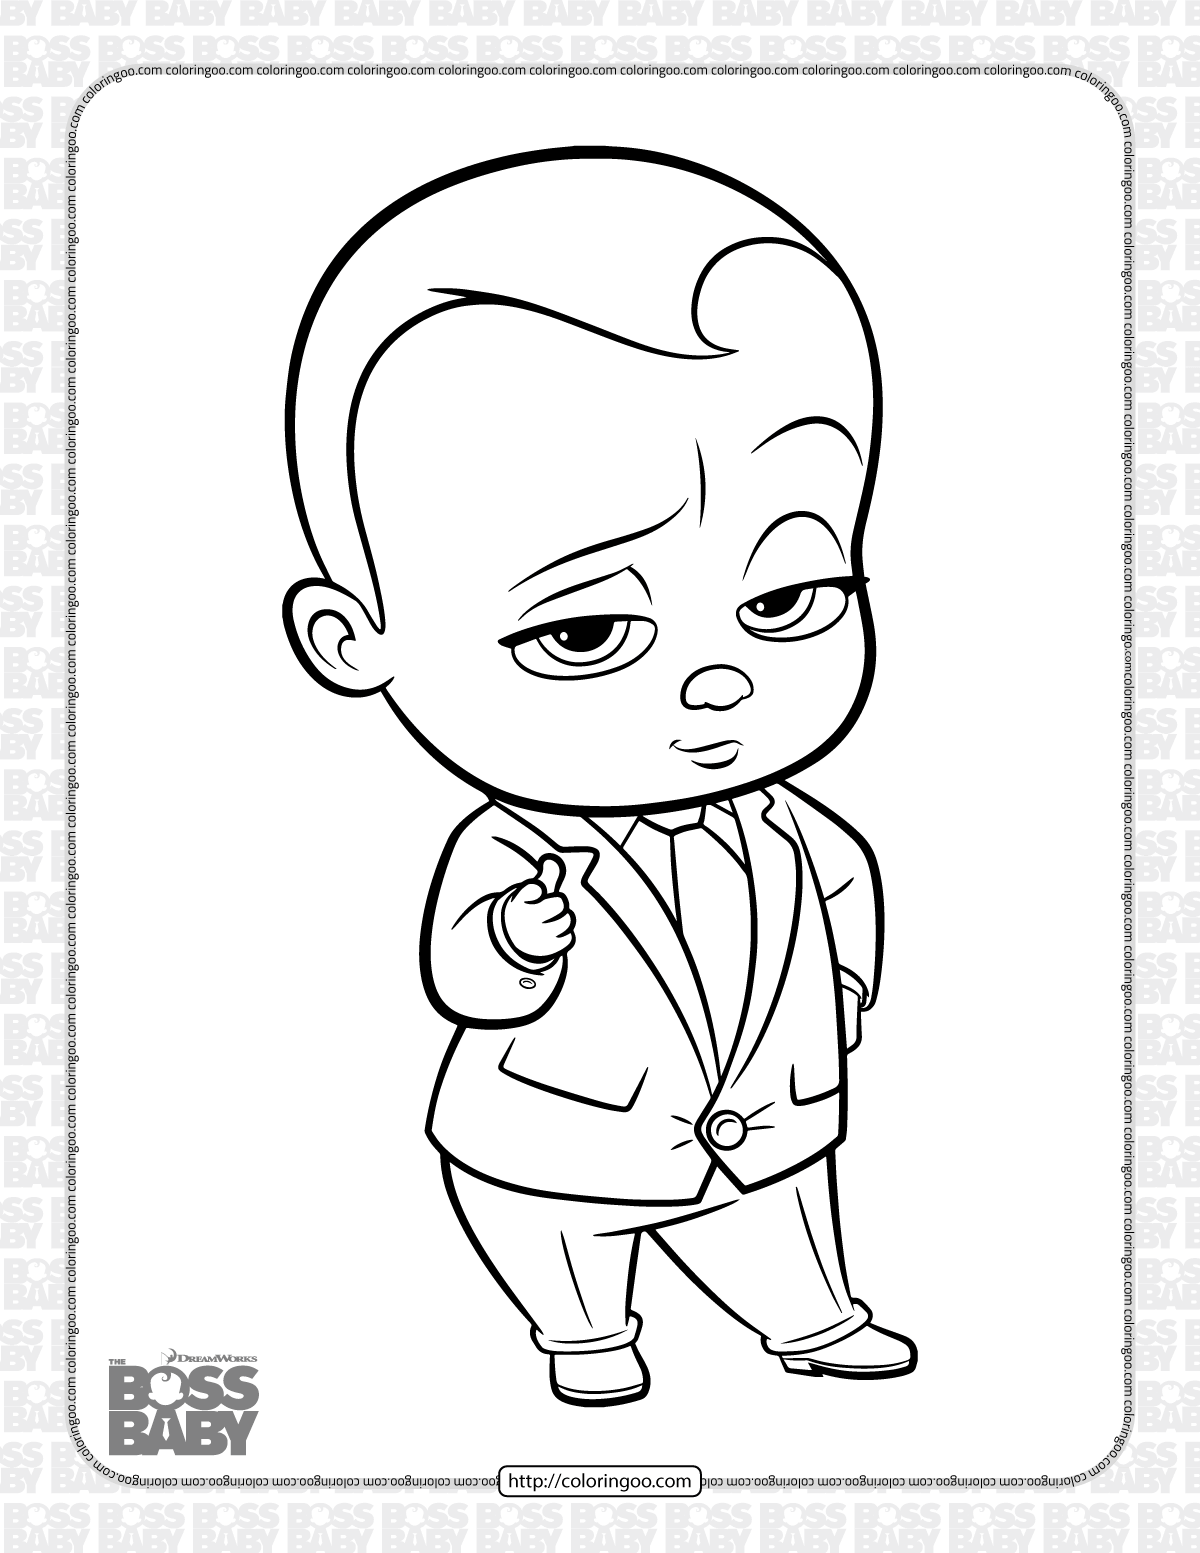 baby boss coloring pages